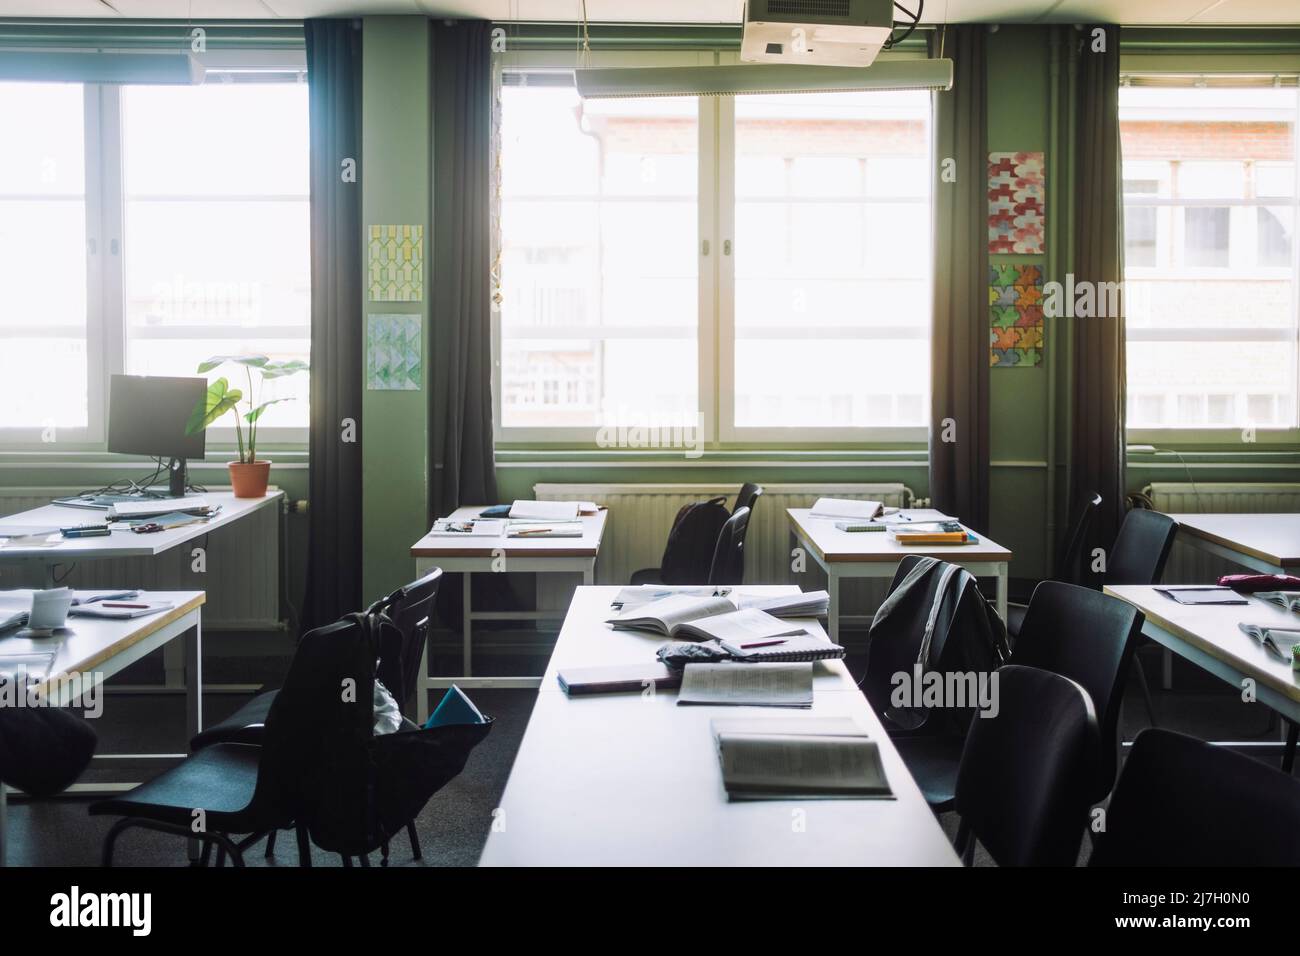 Empty classroom with chairs and desks Stock Photo